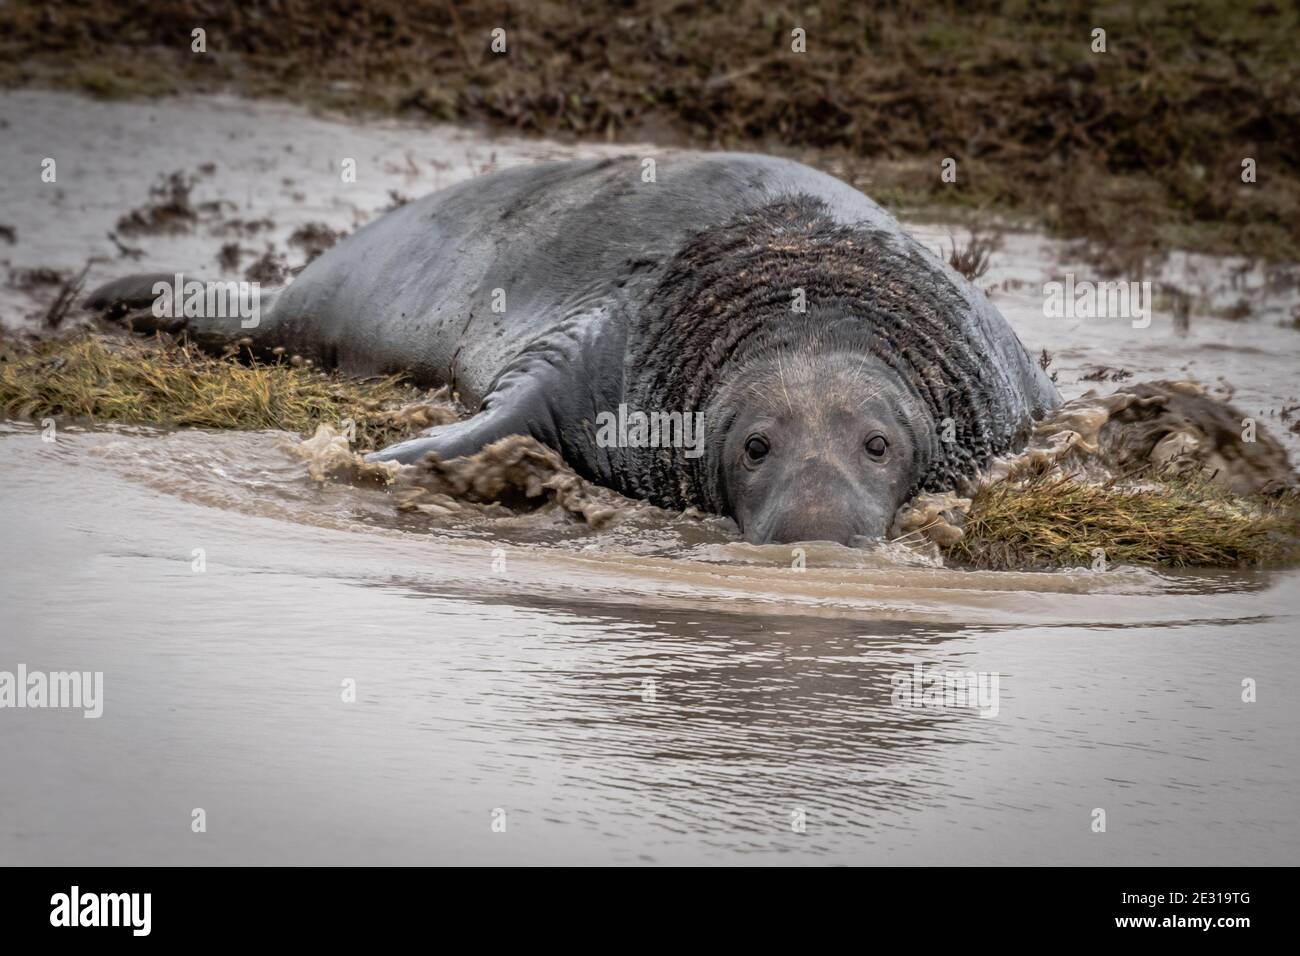 A close up of a large grey gray seal bull splashing in the water. he is cautiously staring forward looking directly at the camera Stock Photo